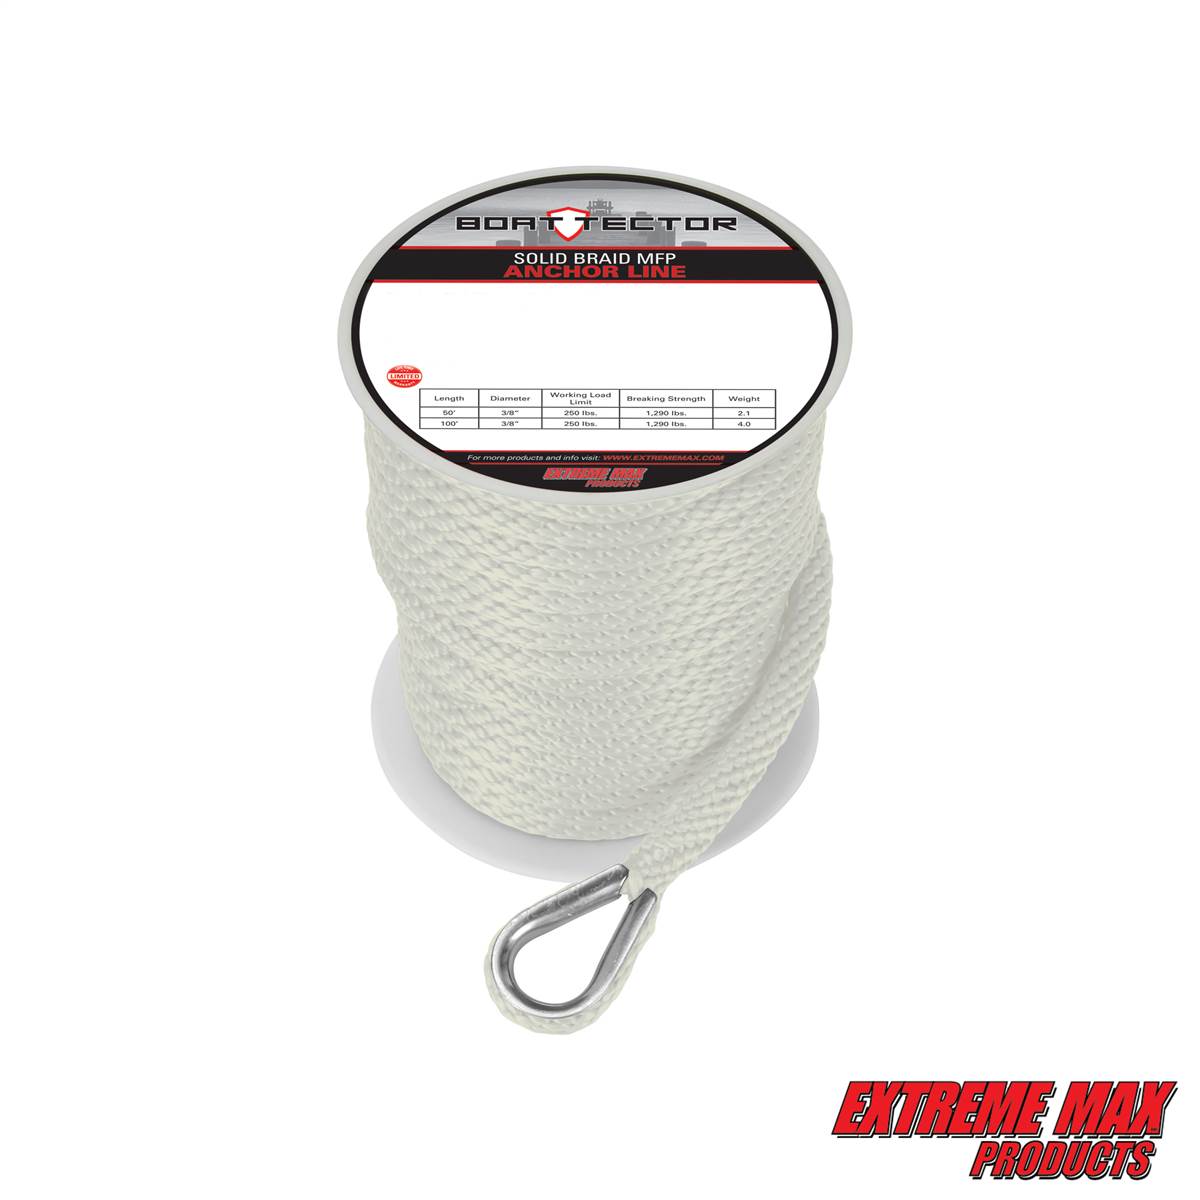 Extreme Max BoatTector Premium Solid Braid MFP Anchor Line with Snap Hook